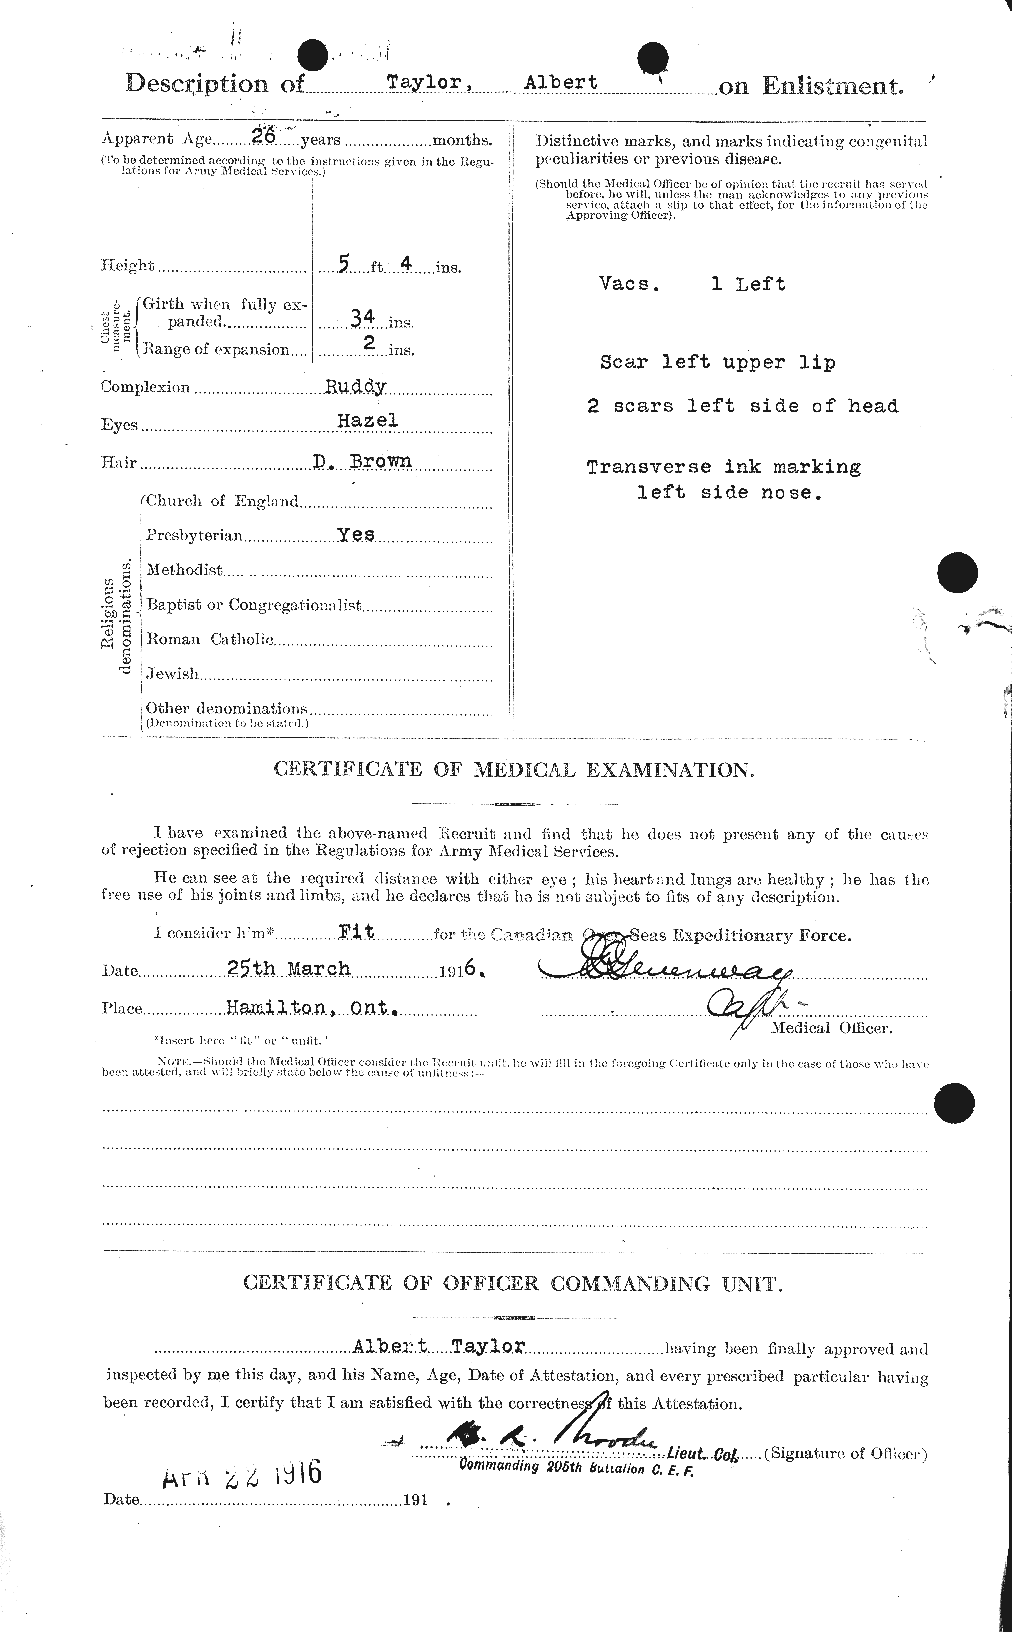 Personnel Records of the First World War - CEF 626104b